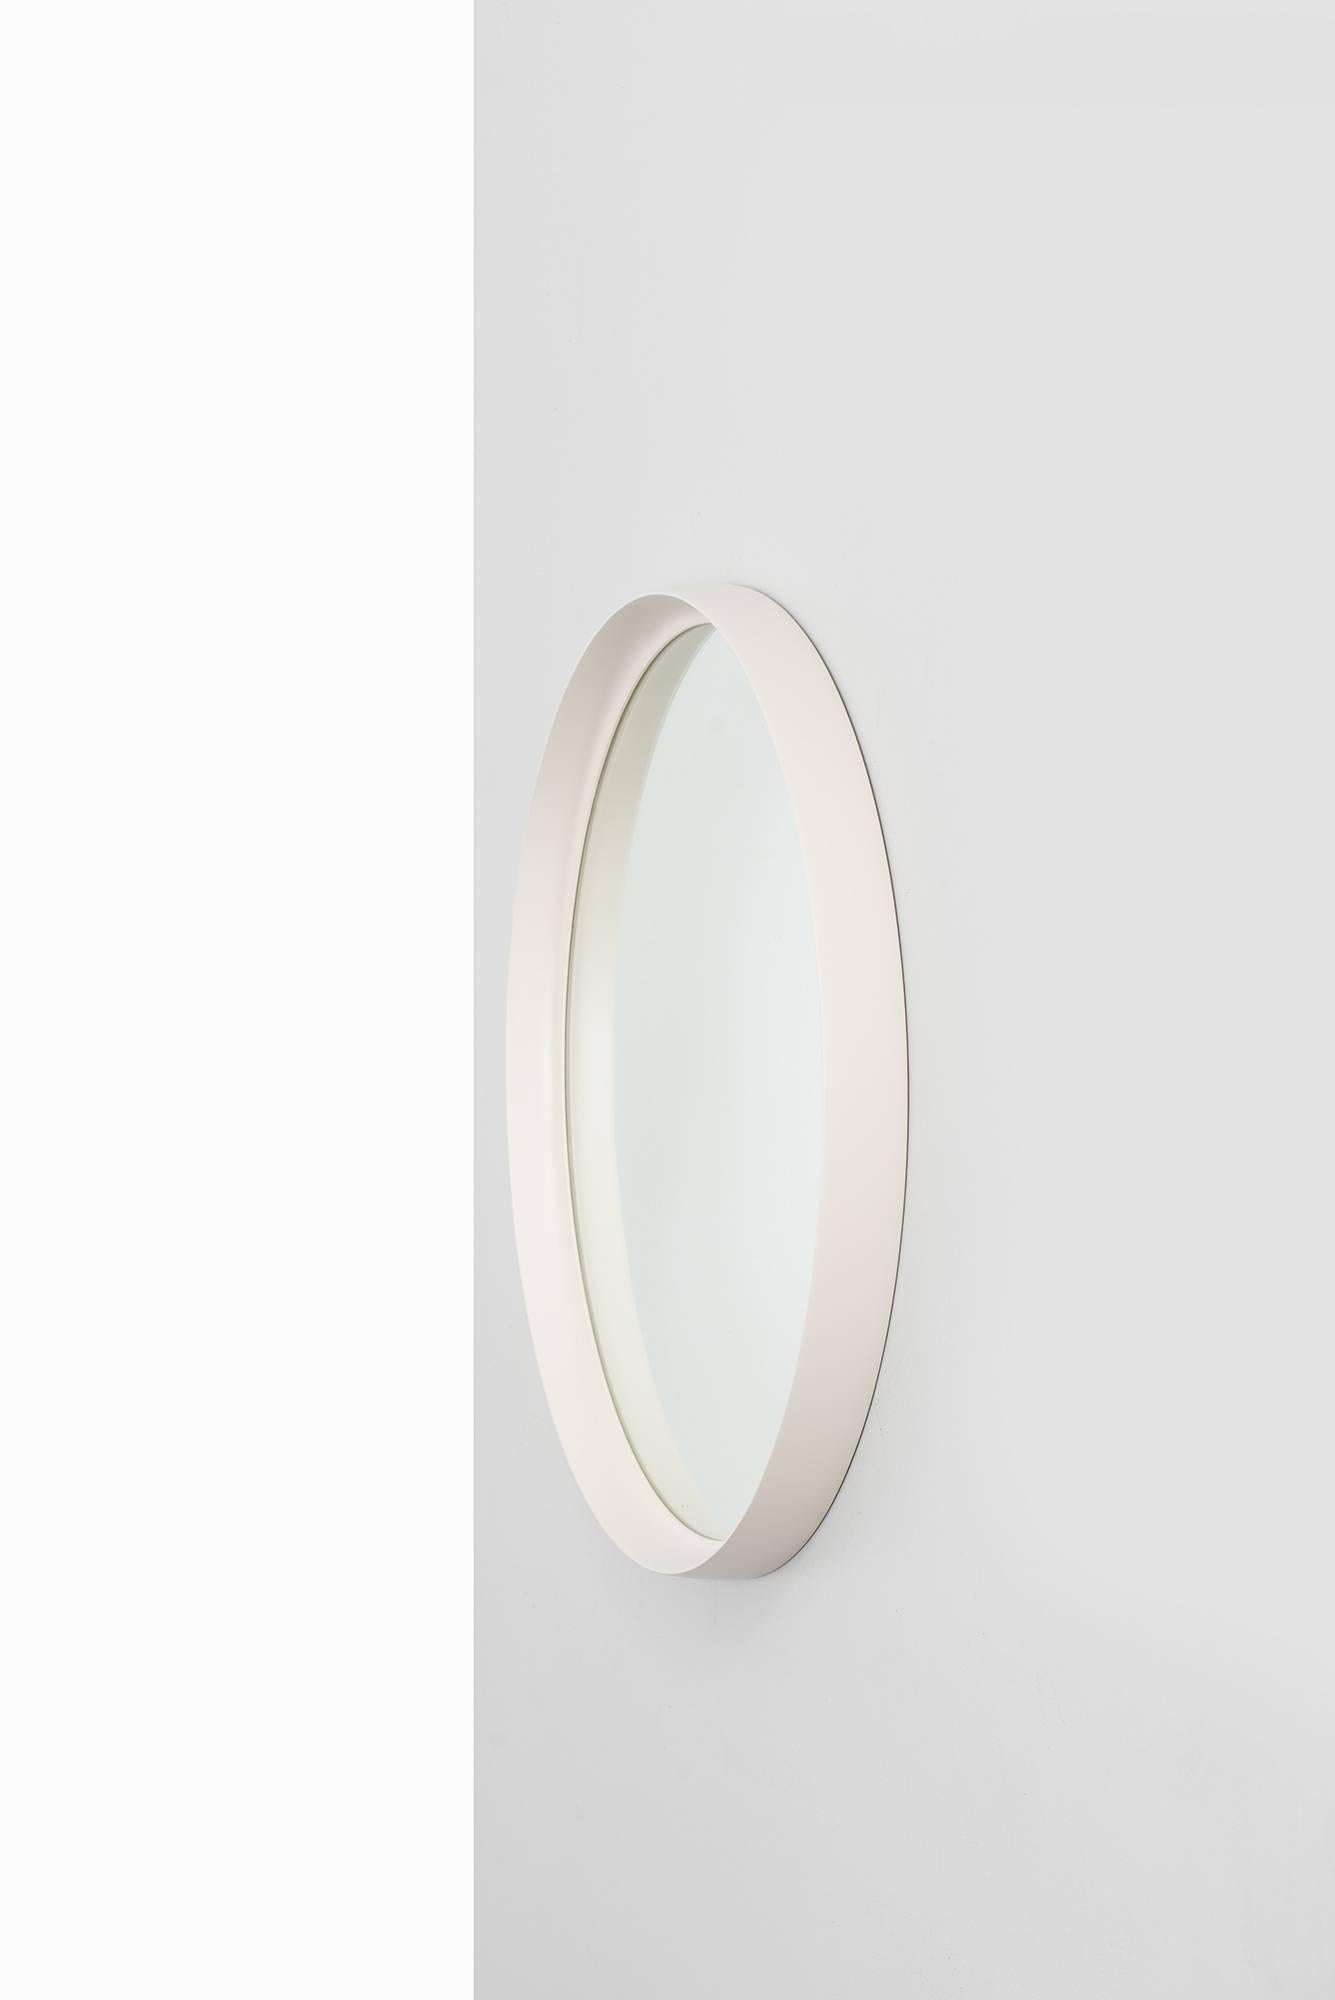 White lacquered round mirror probably produced in Sweden.